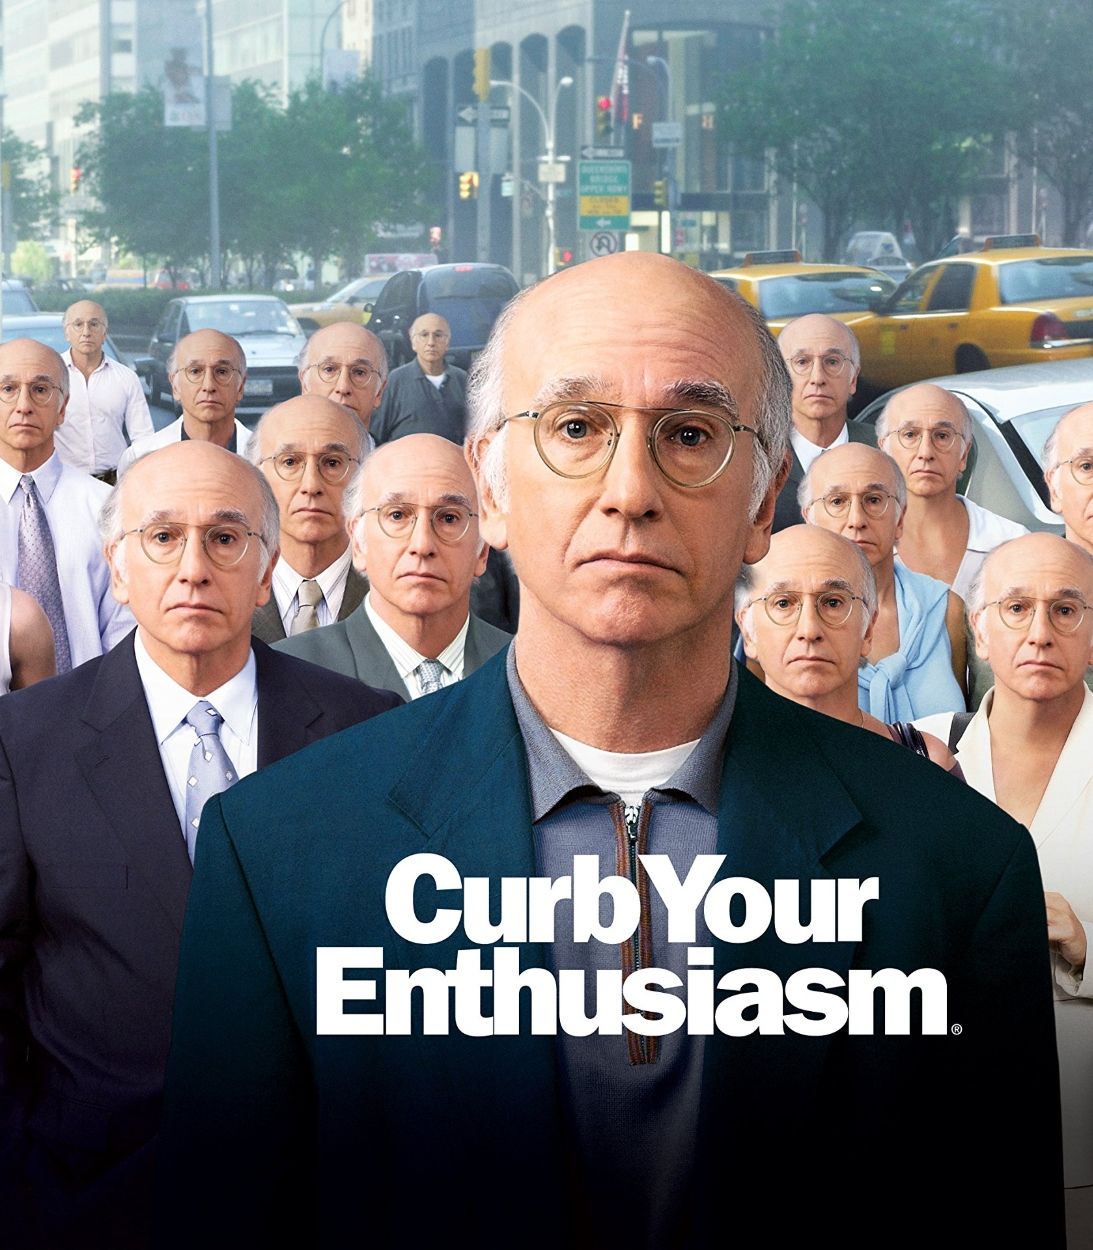 curb your enthusiasm HBO poster Vertical